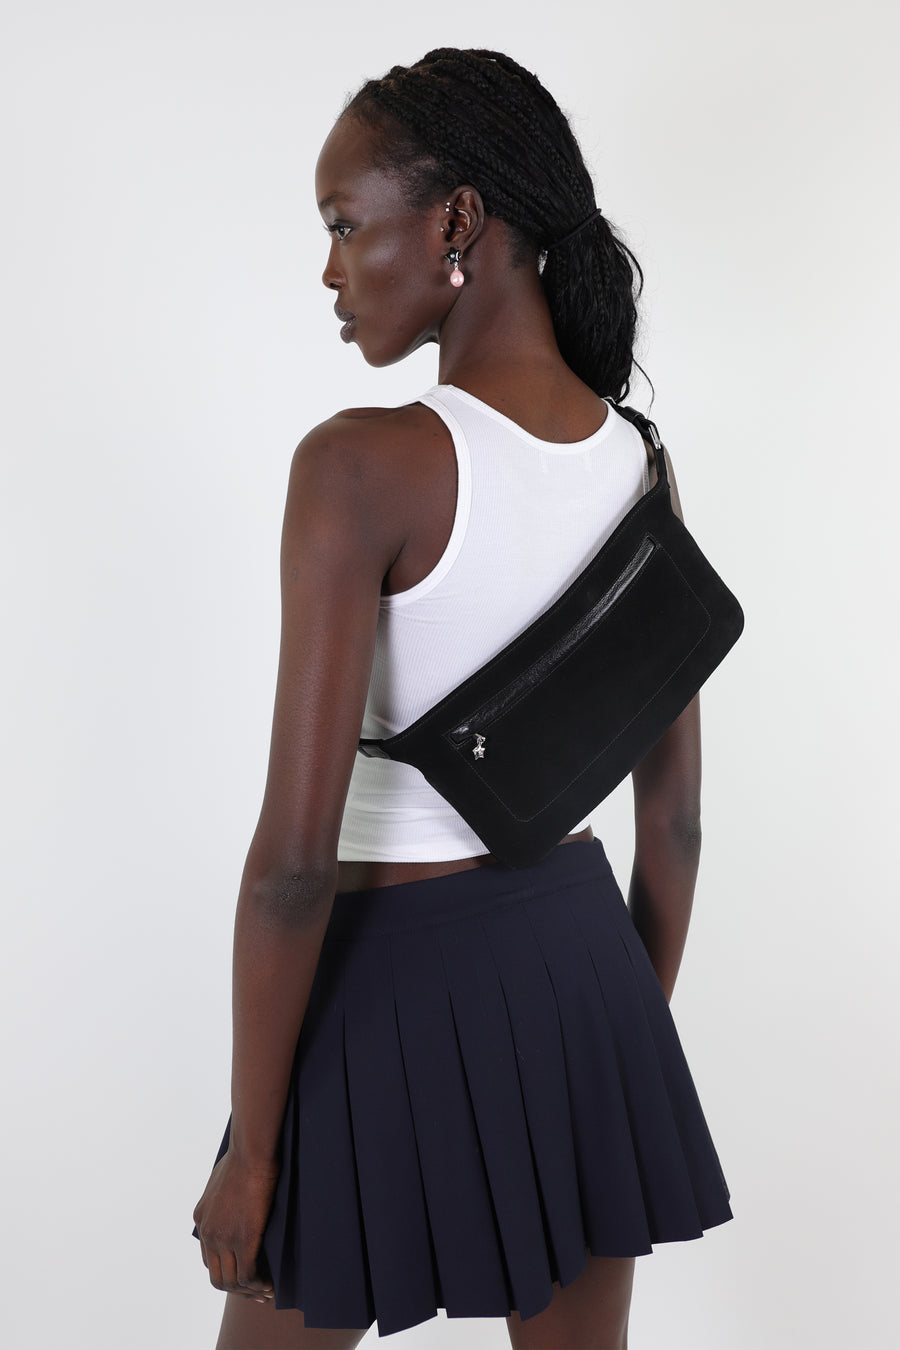 Black suede and leather crossbody or waist bag on model